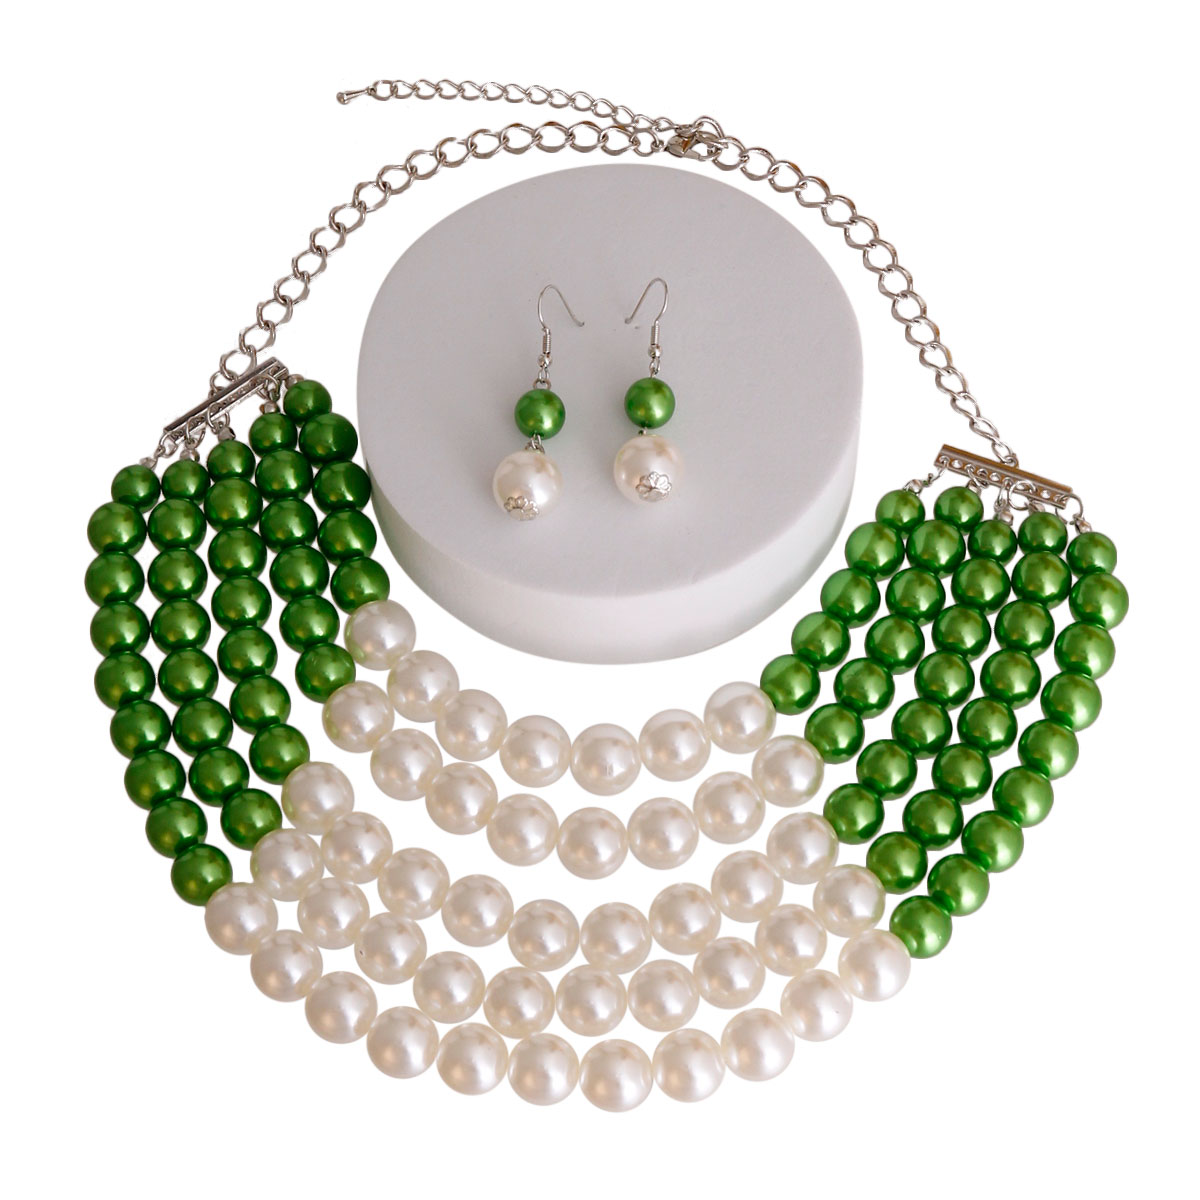 Green and Cream Pearl 5 Row Necklace